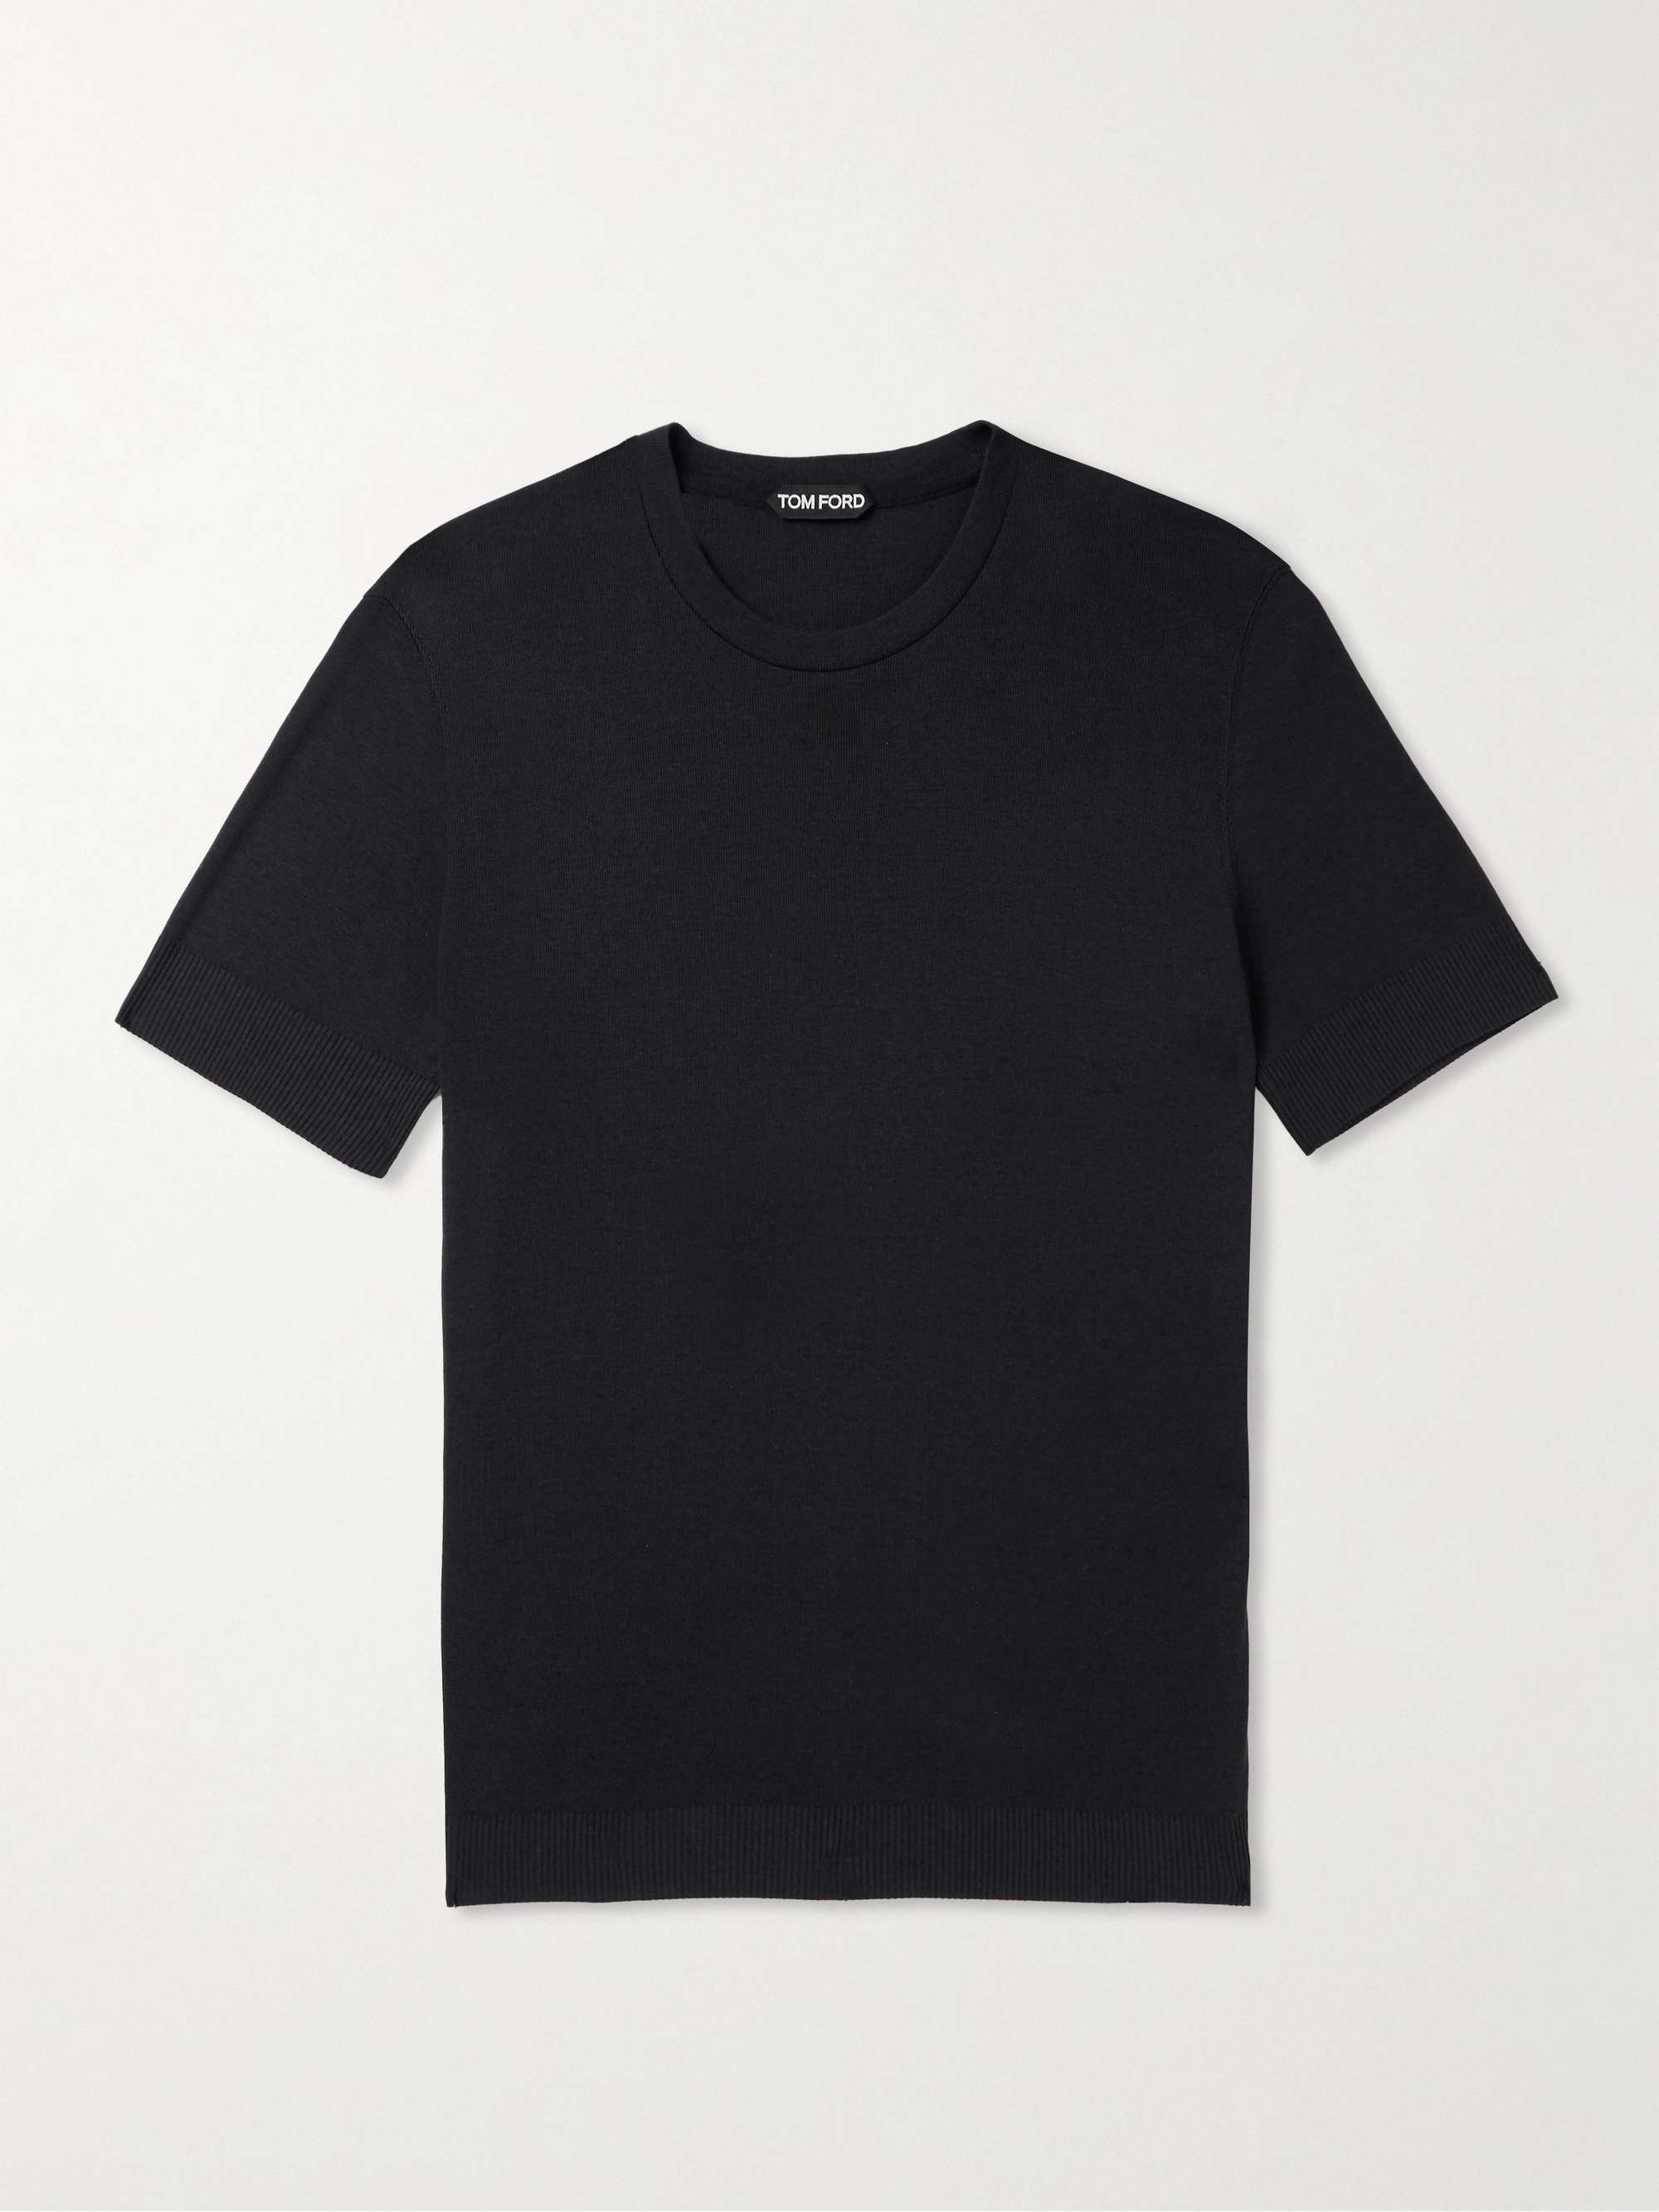 TOM FORD Placed Rib Slim-Fit Lyocell and Cotton-Blend Jersey T-Shirt ...